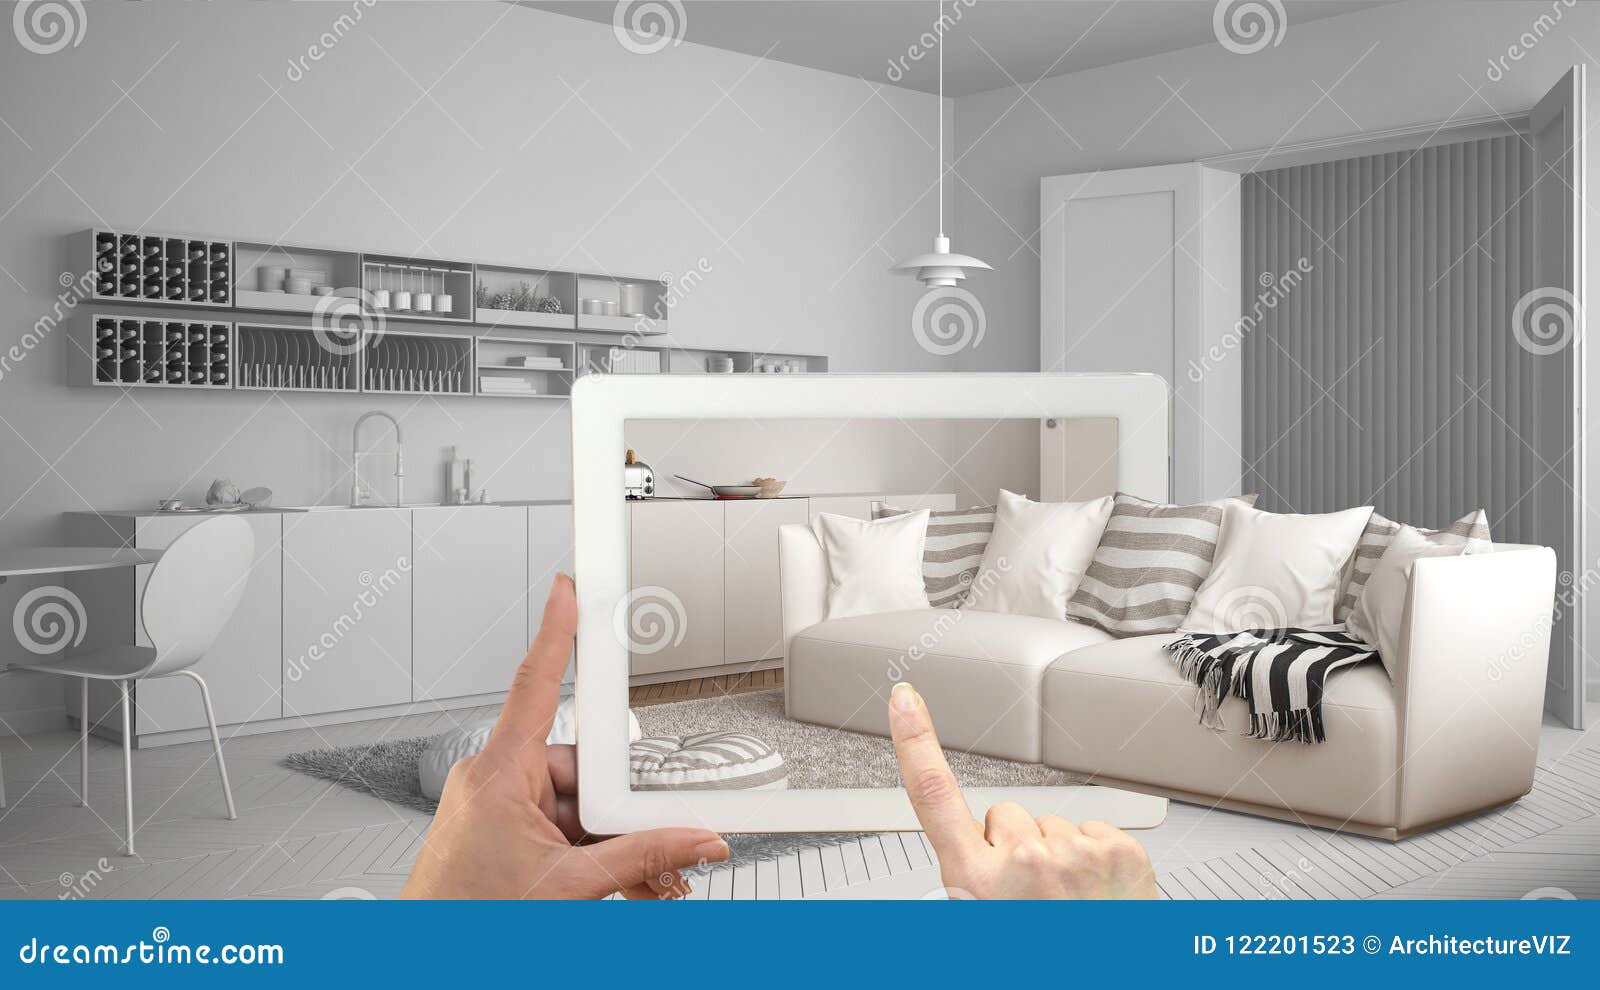 augmented reality concept. hand holding tablet with ar application used to simulate furniture and interior  products in real